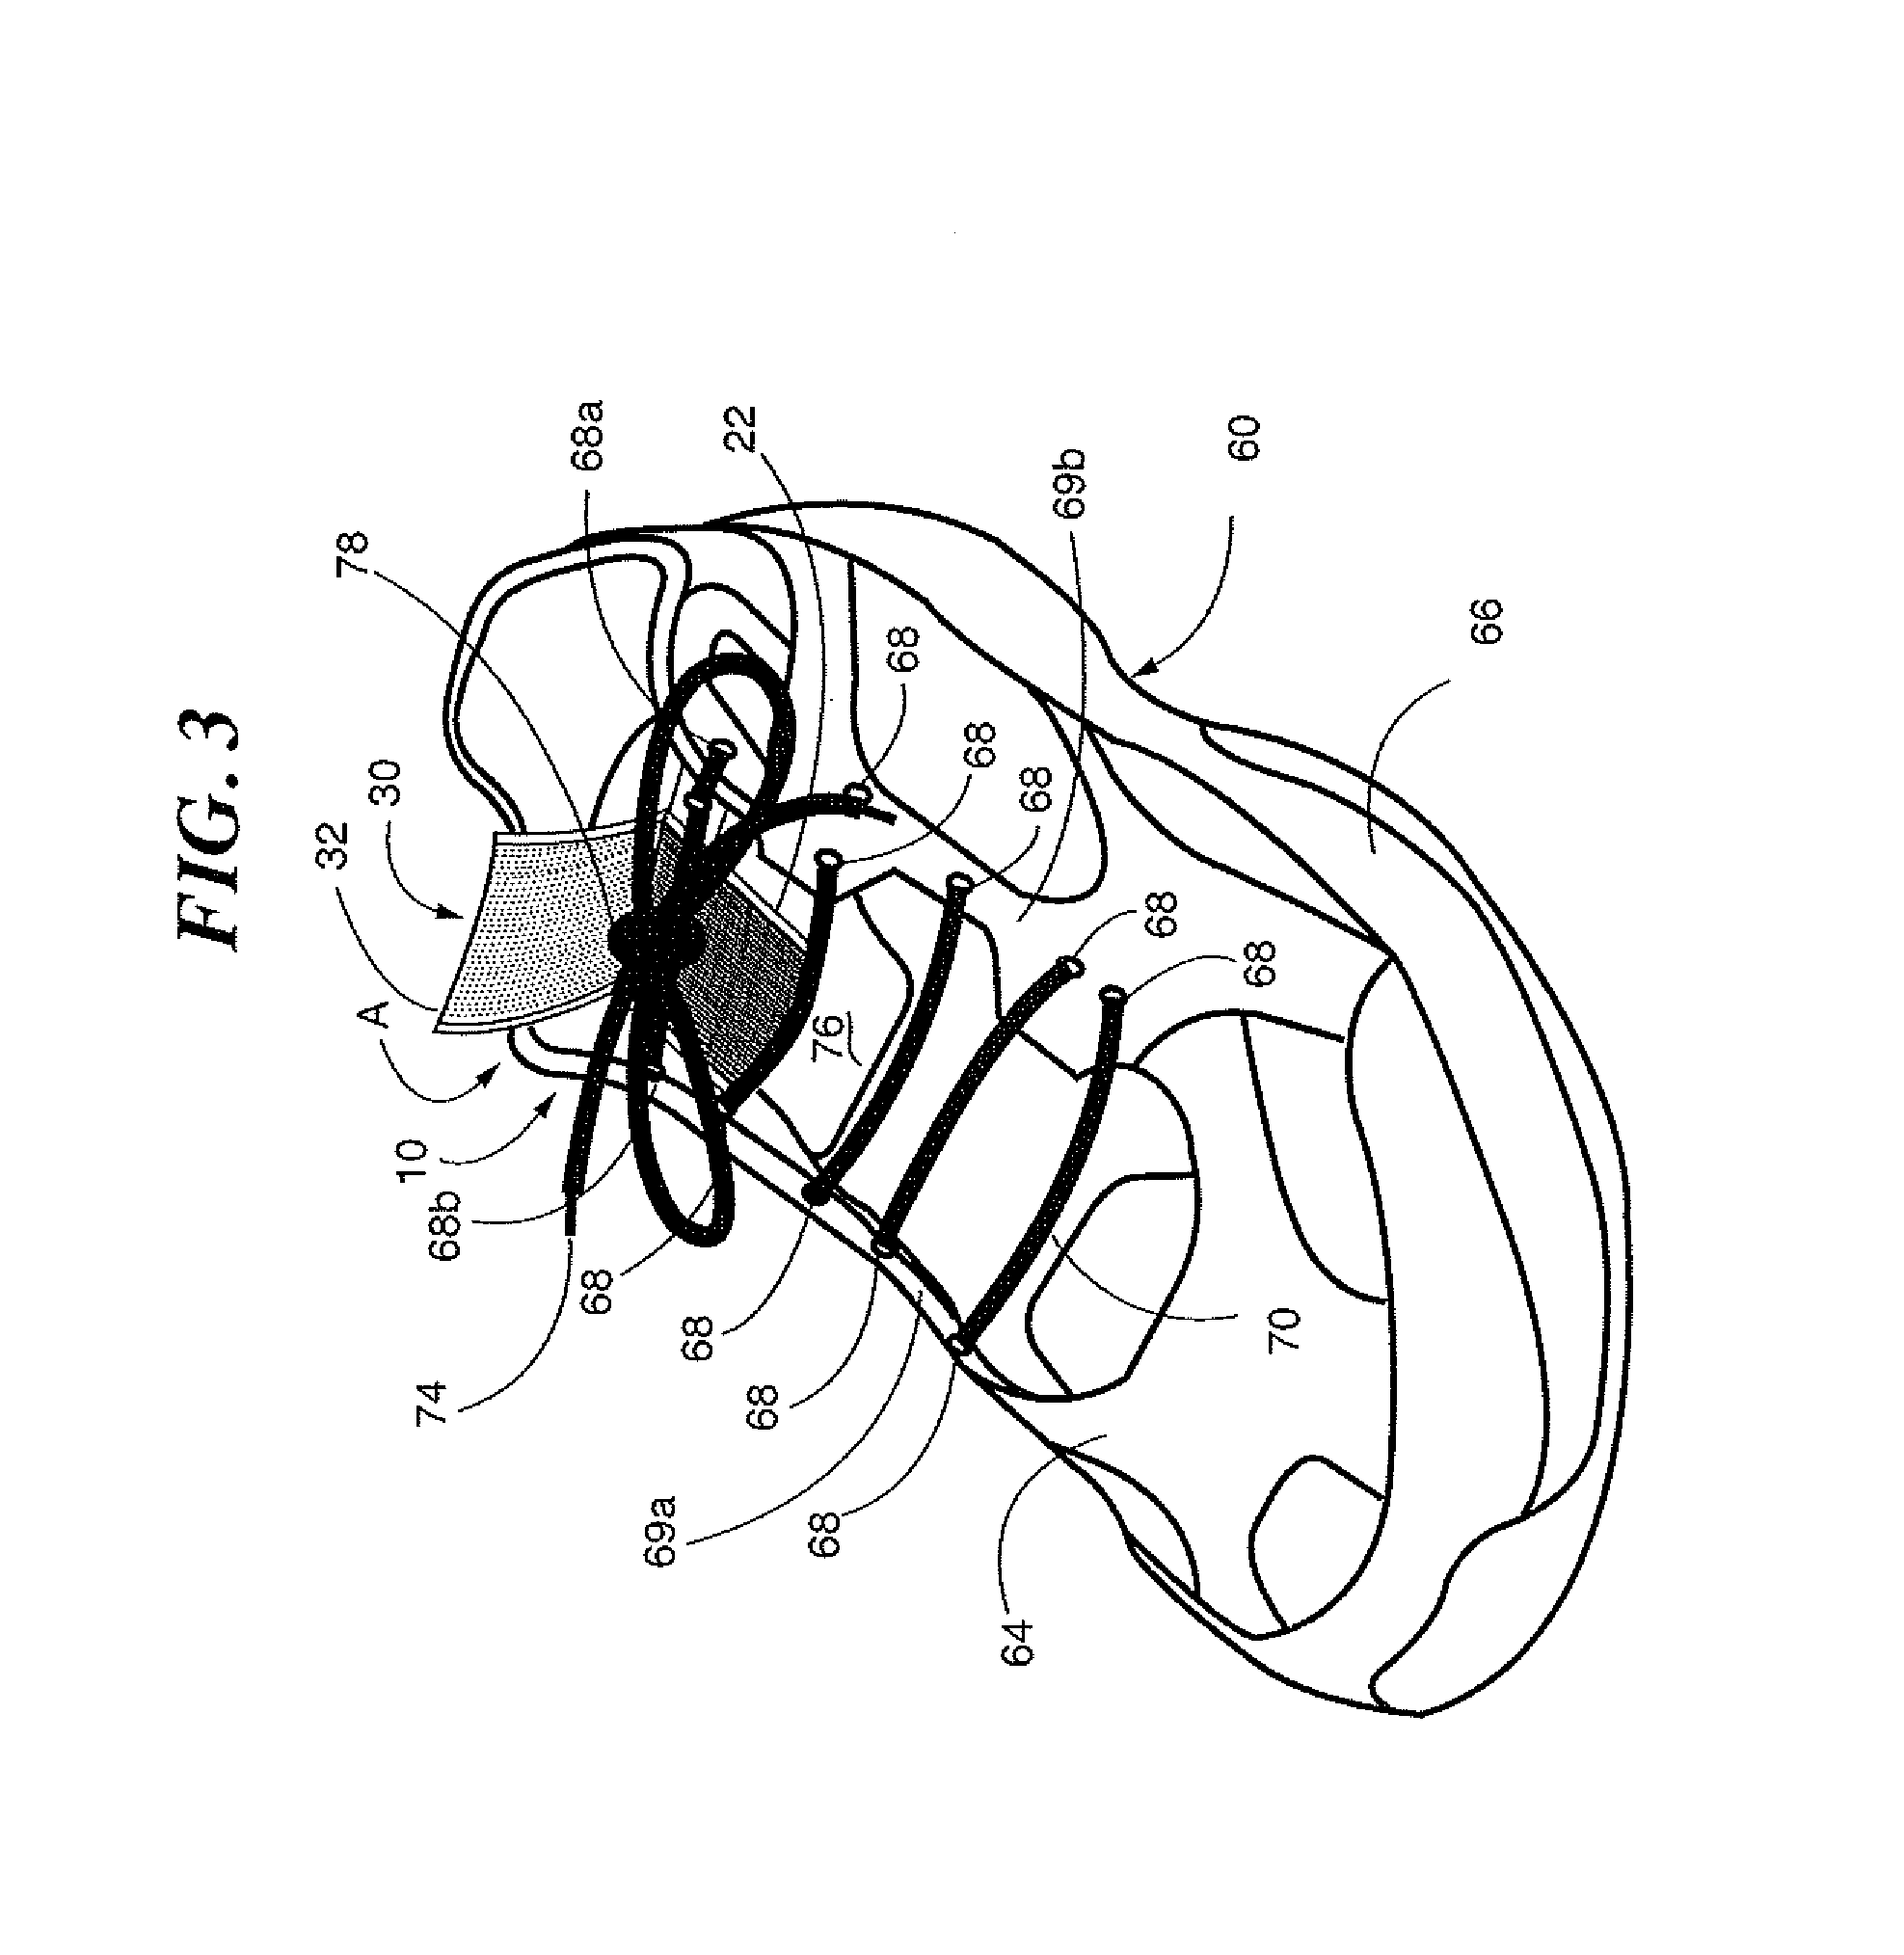 Device for maintaining a tied shoe lace knot